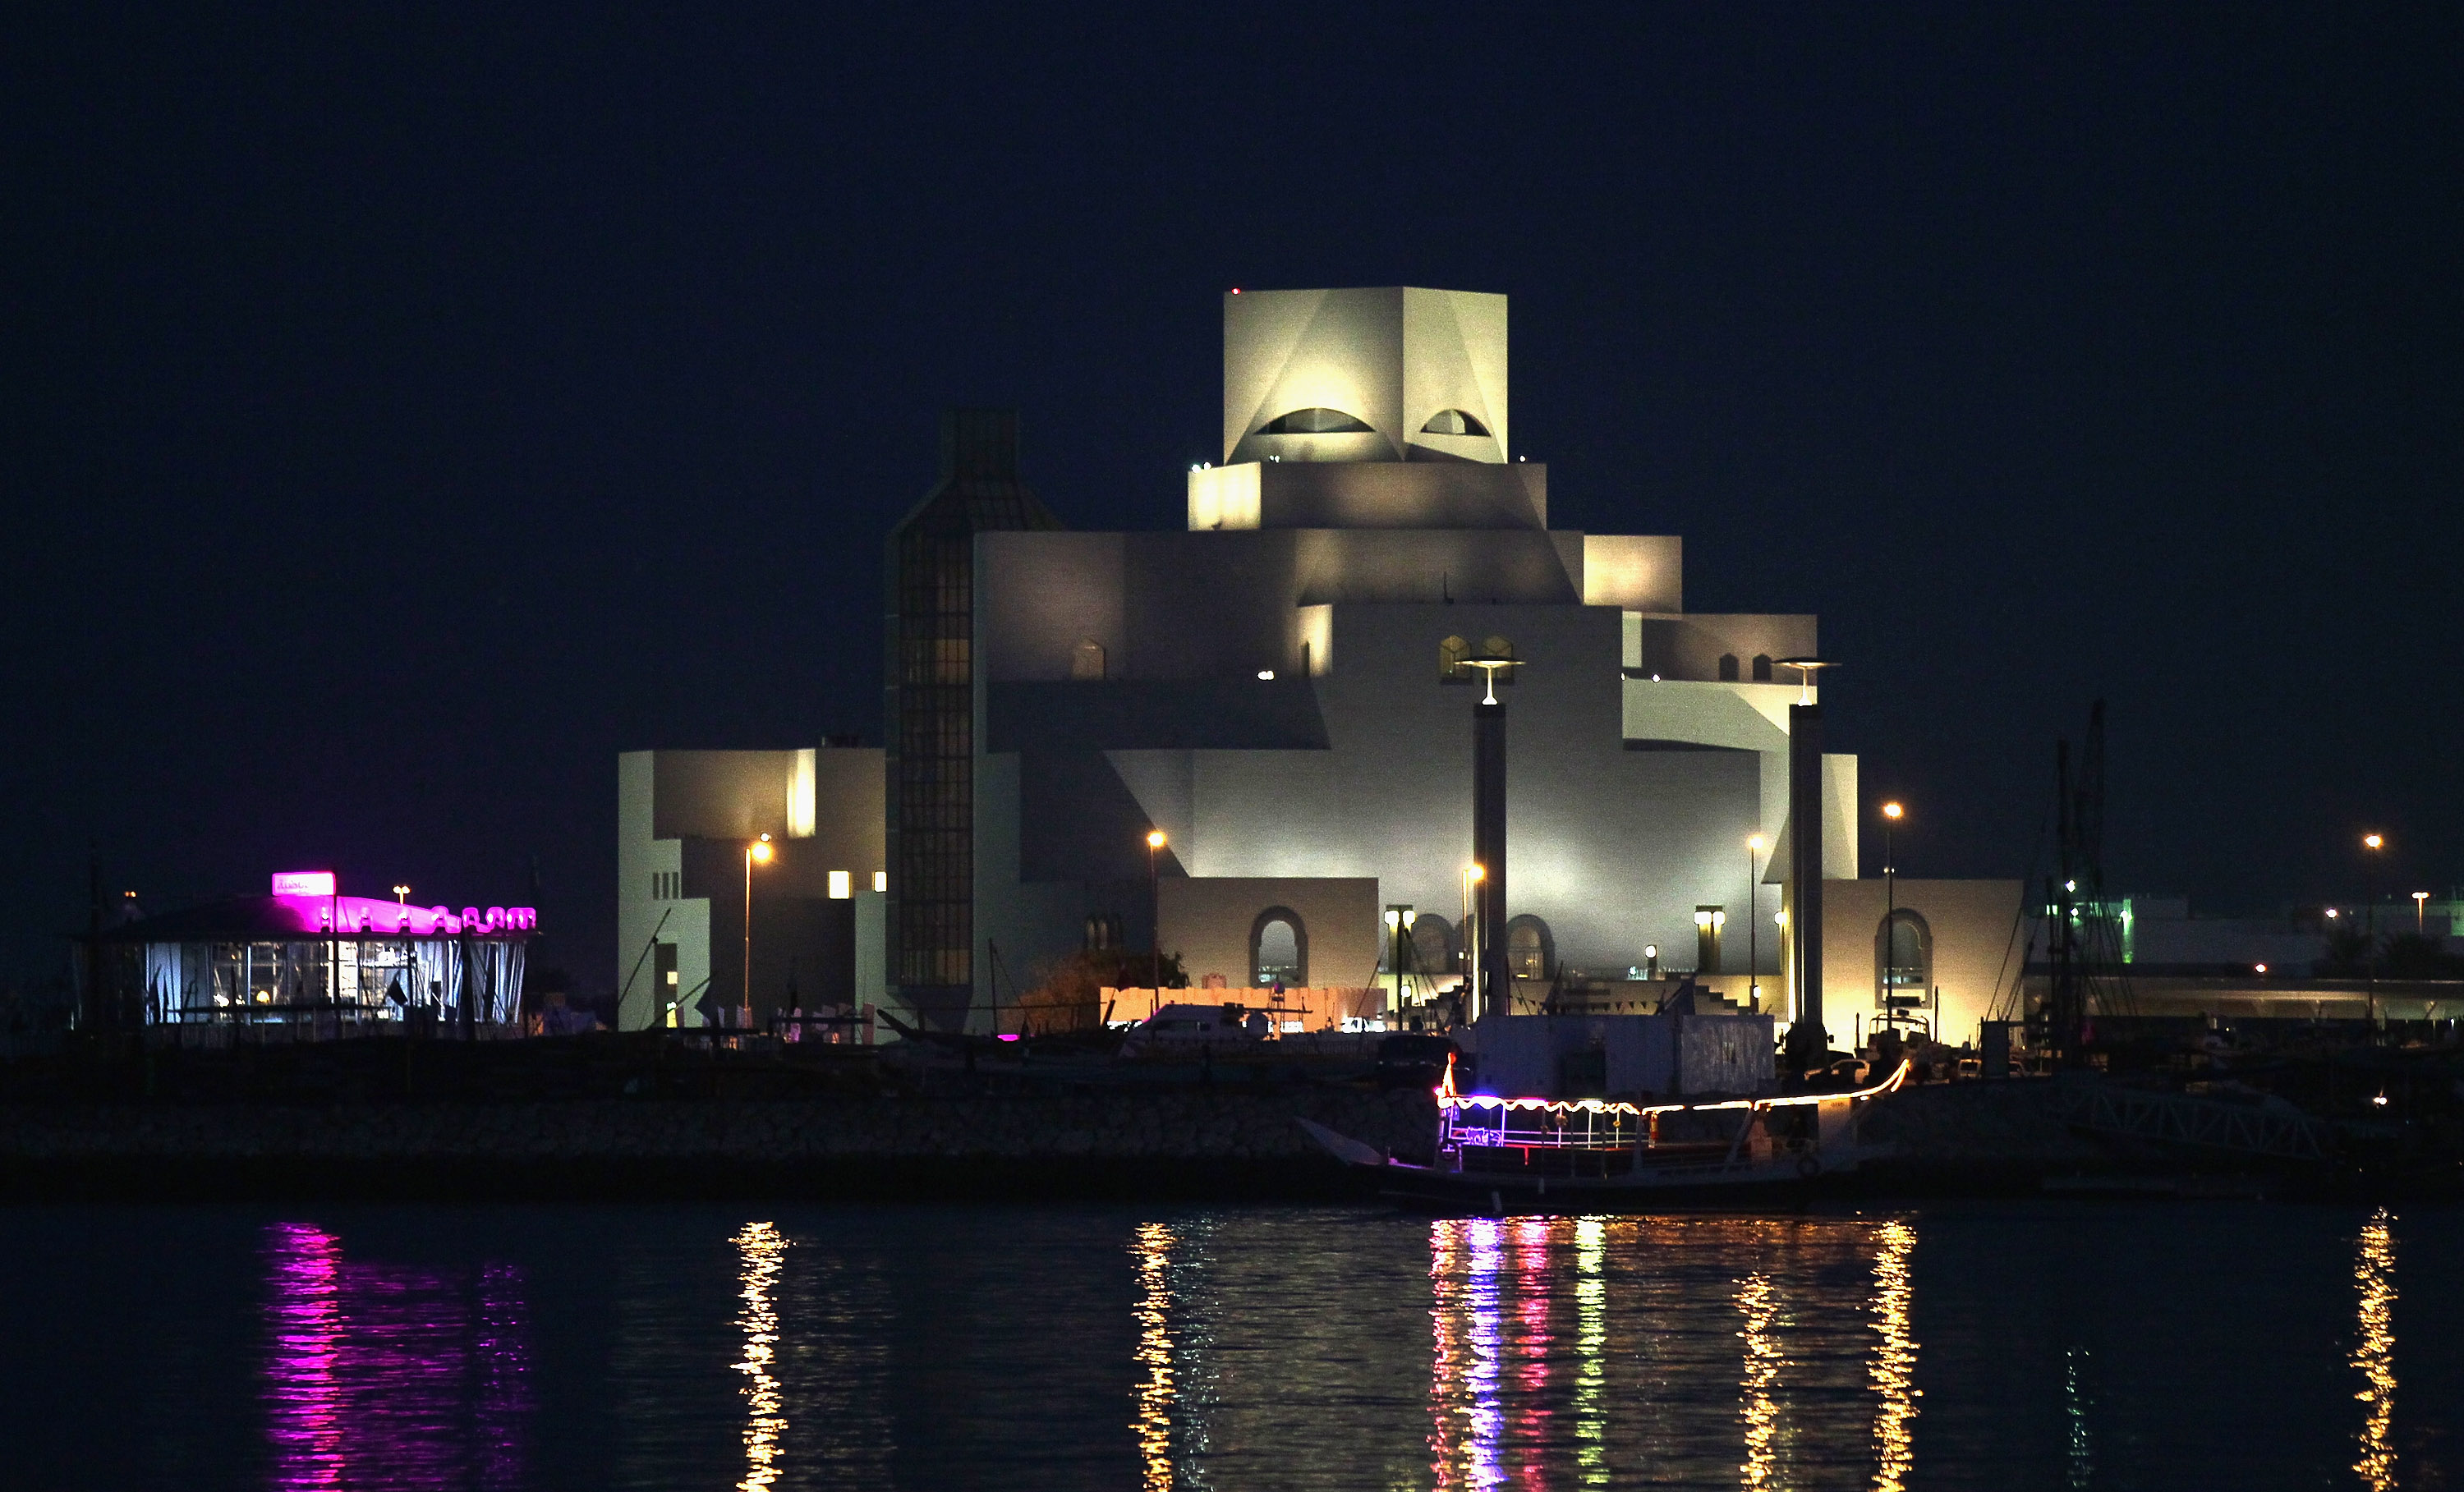 DOHA, QATAR - JANUARY 04: View of the museum of islamic art is taken on January 4, 2011 in Doha, Qatar. The International Monetary Fund (IMF) recently reiterated its projection for the Qatari economy with predictions of double digit growth for 2010 and 20